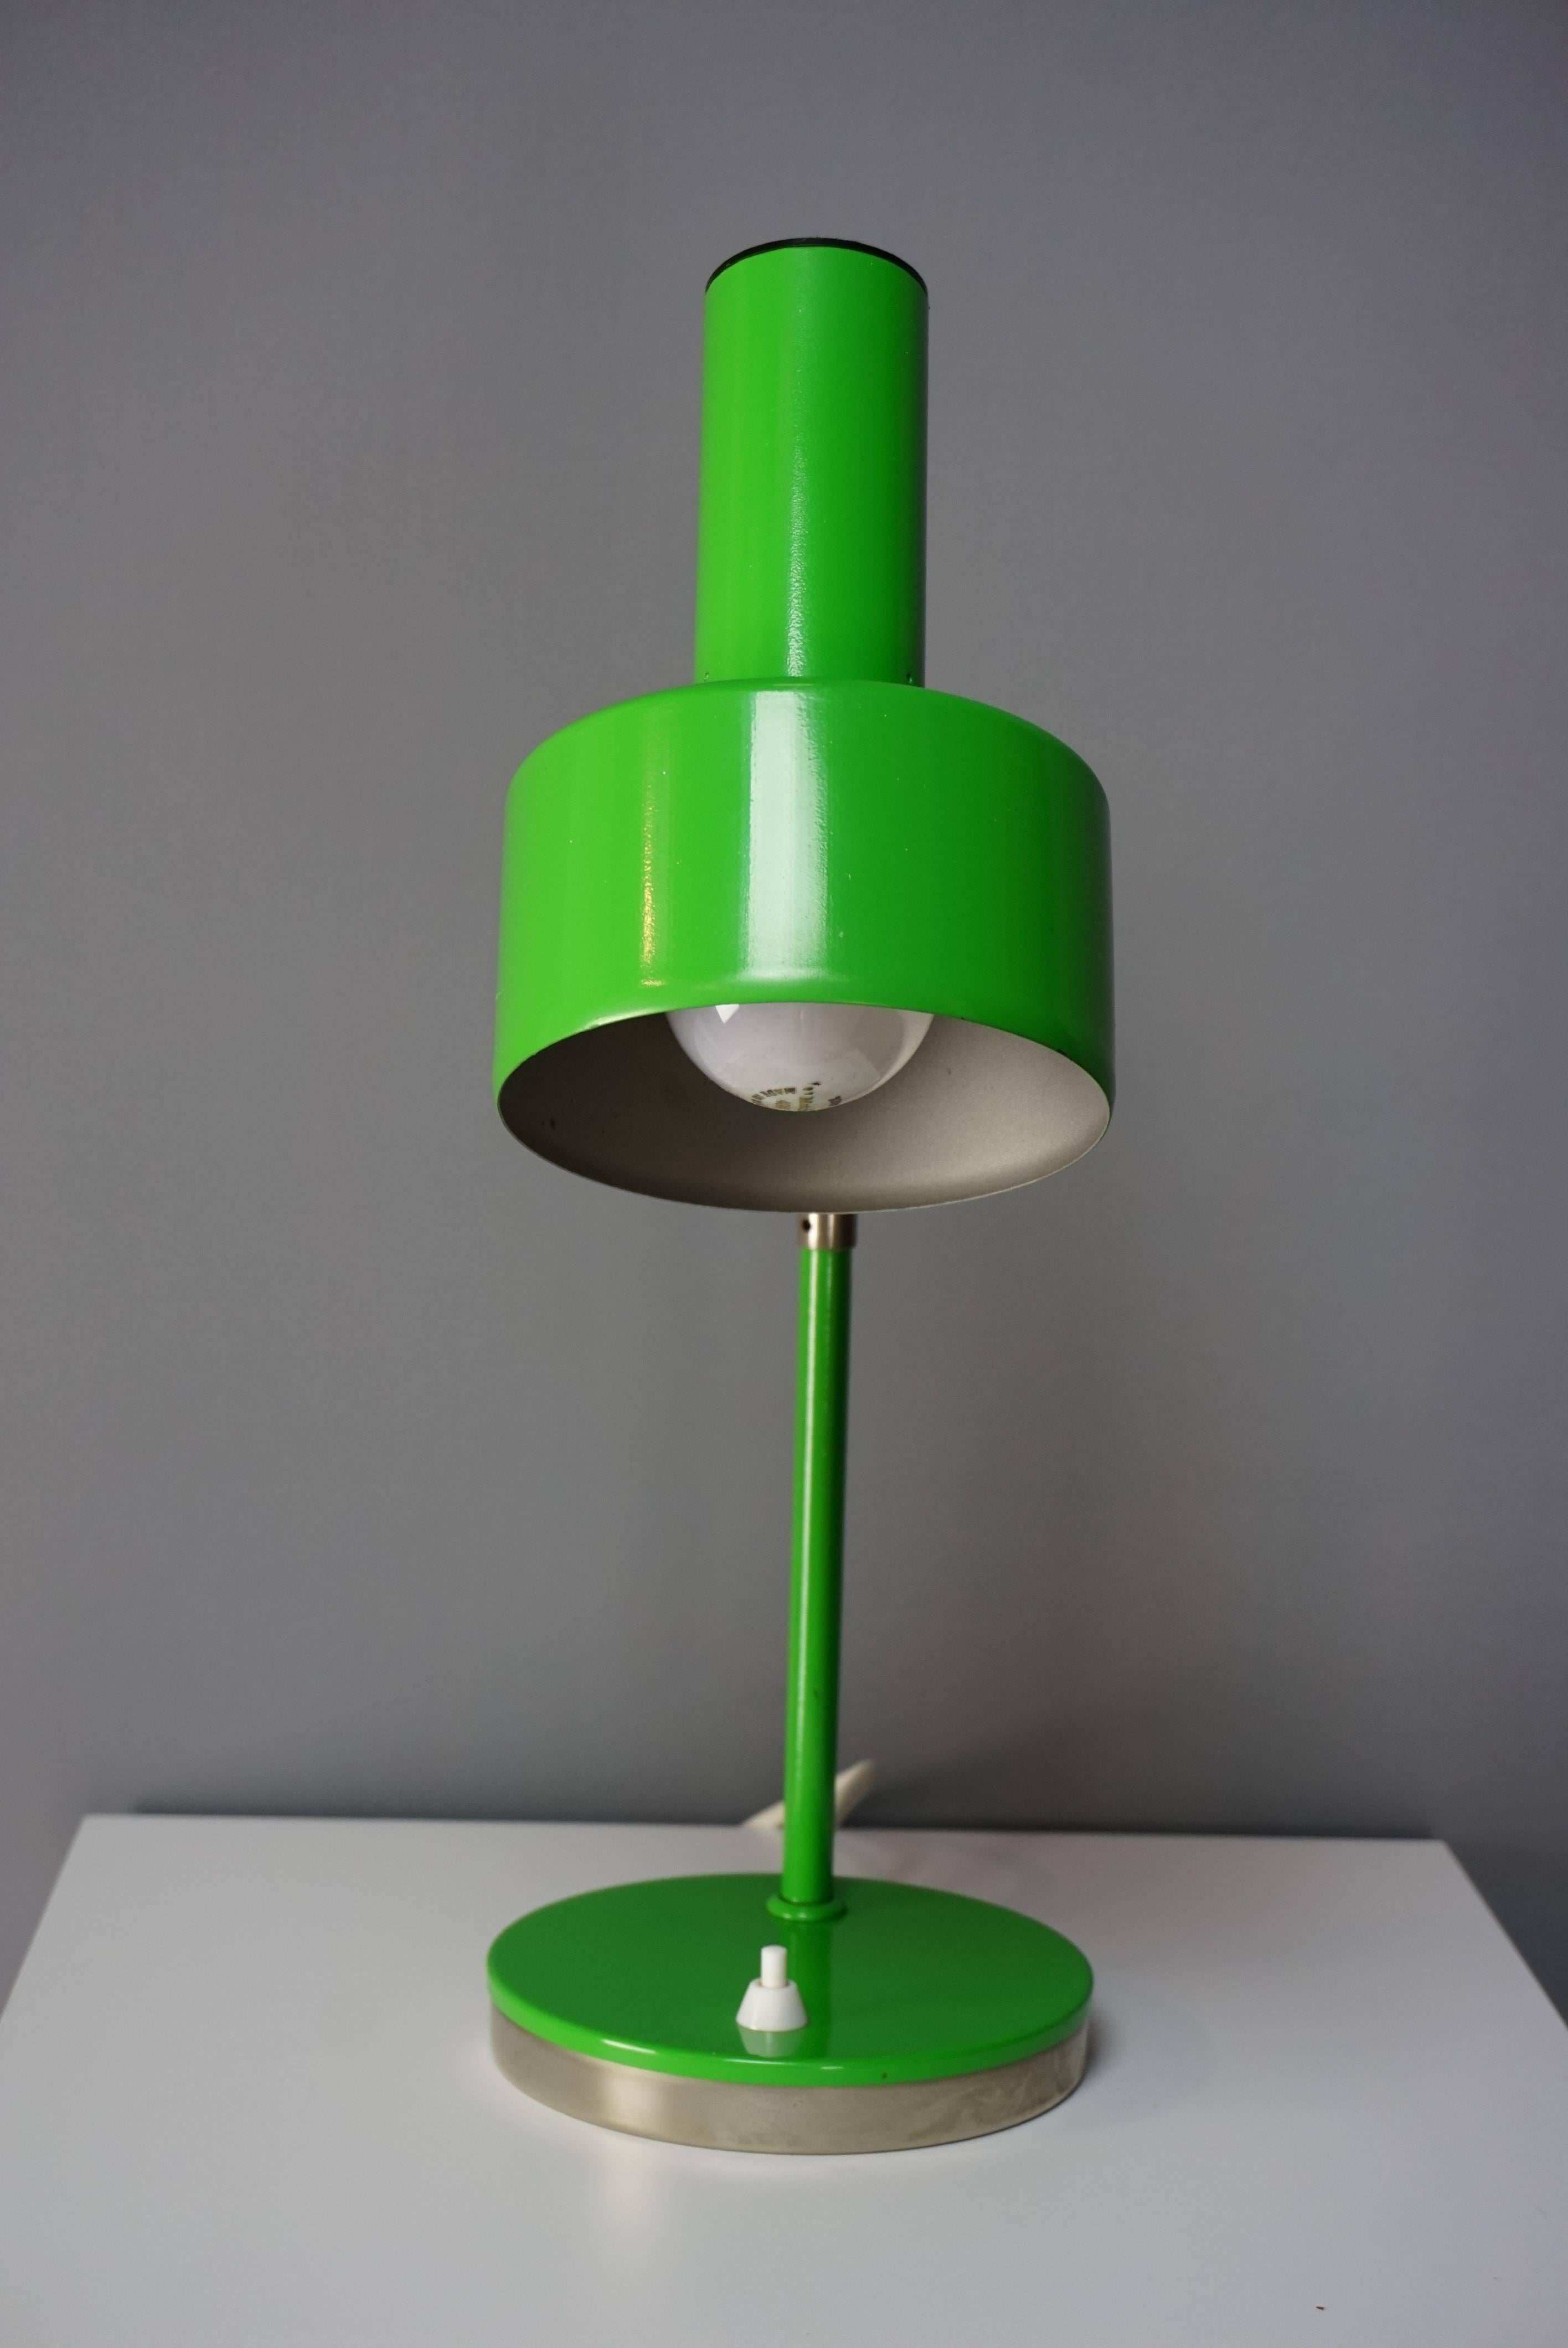 20th Century Midcentury Green Metal Articulated Lamp 1960s Design